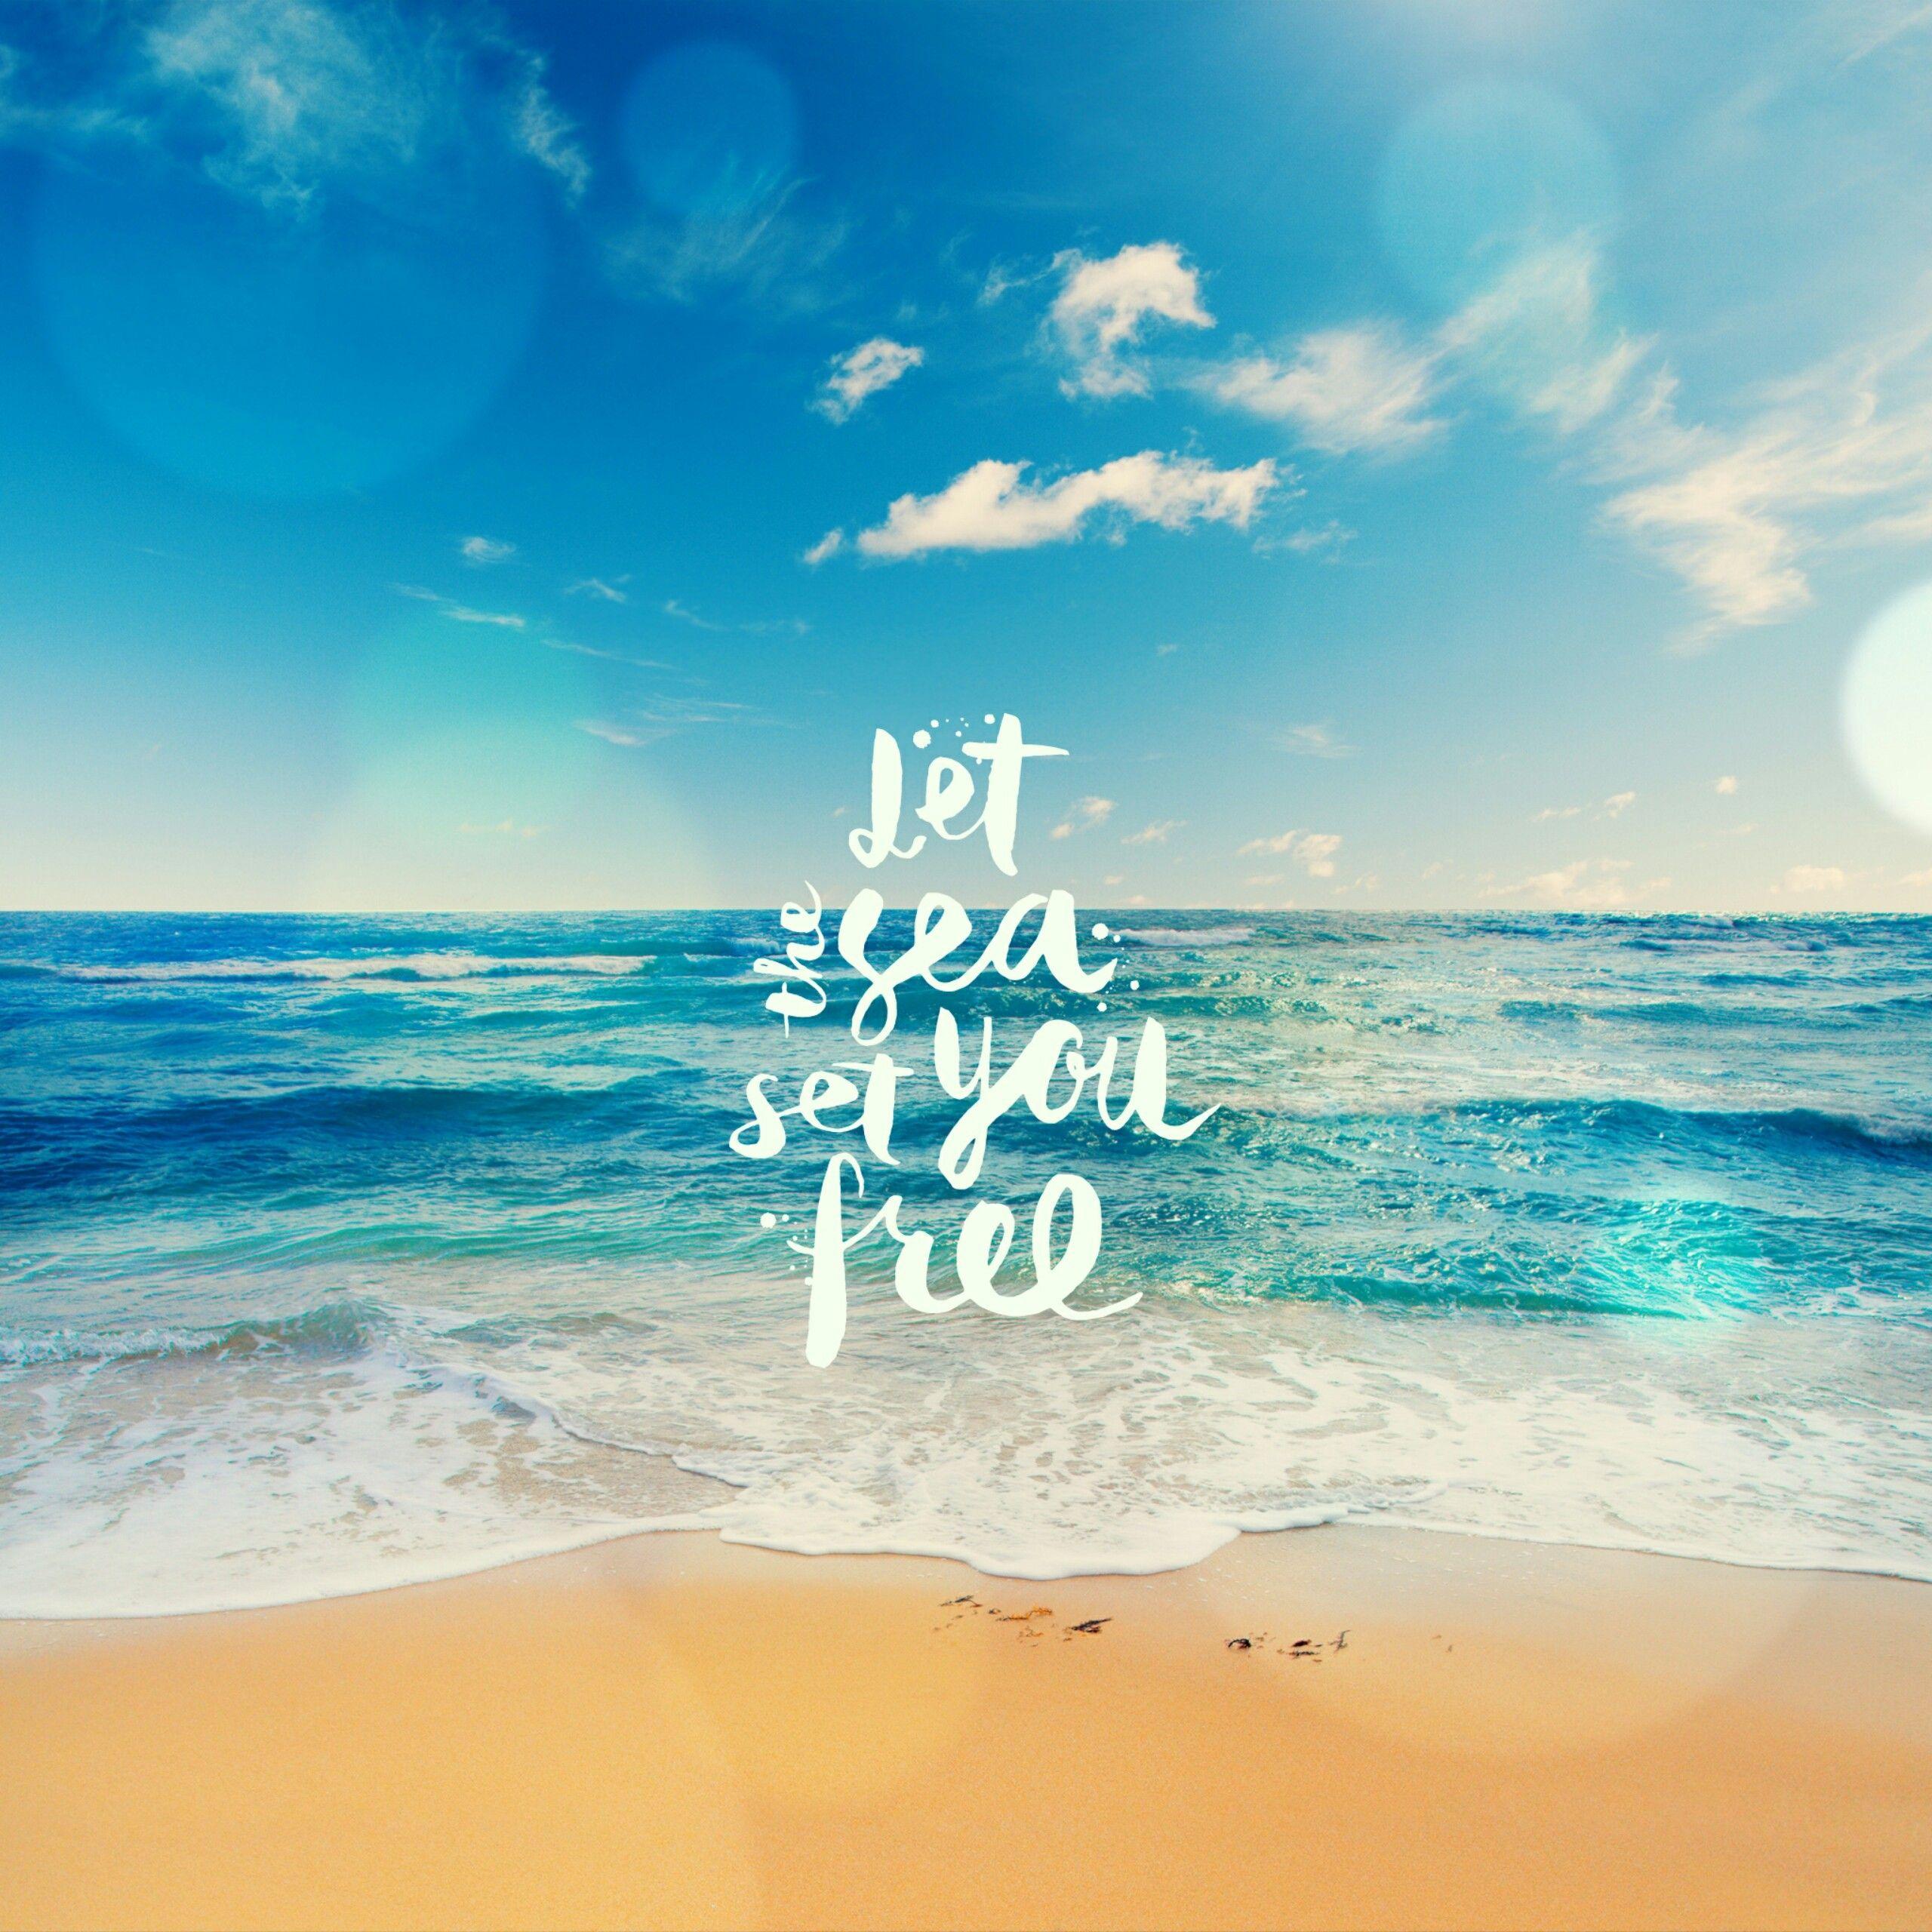 Let The Sea Set You Free Quotes QHD Wallpaper